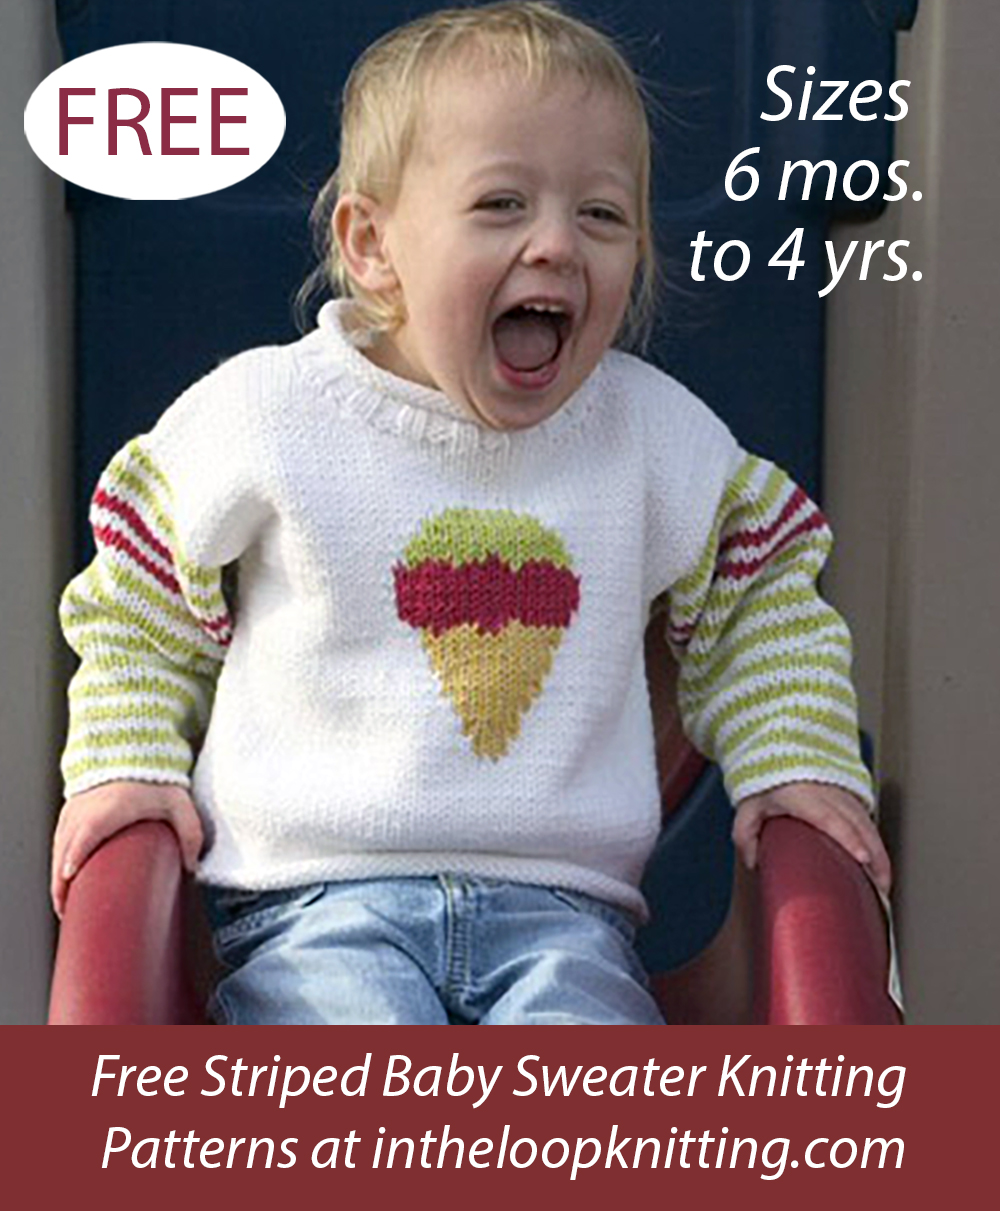 Free Double Scoop Baby Sweater Knitting Pattern